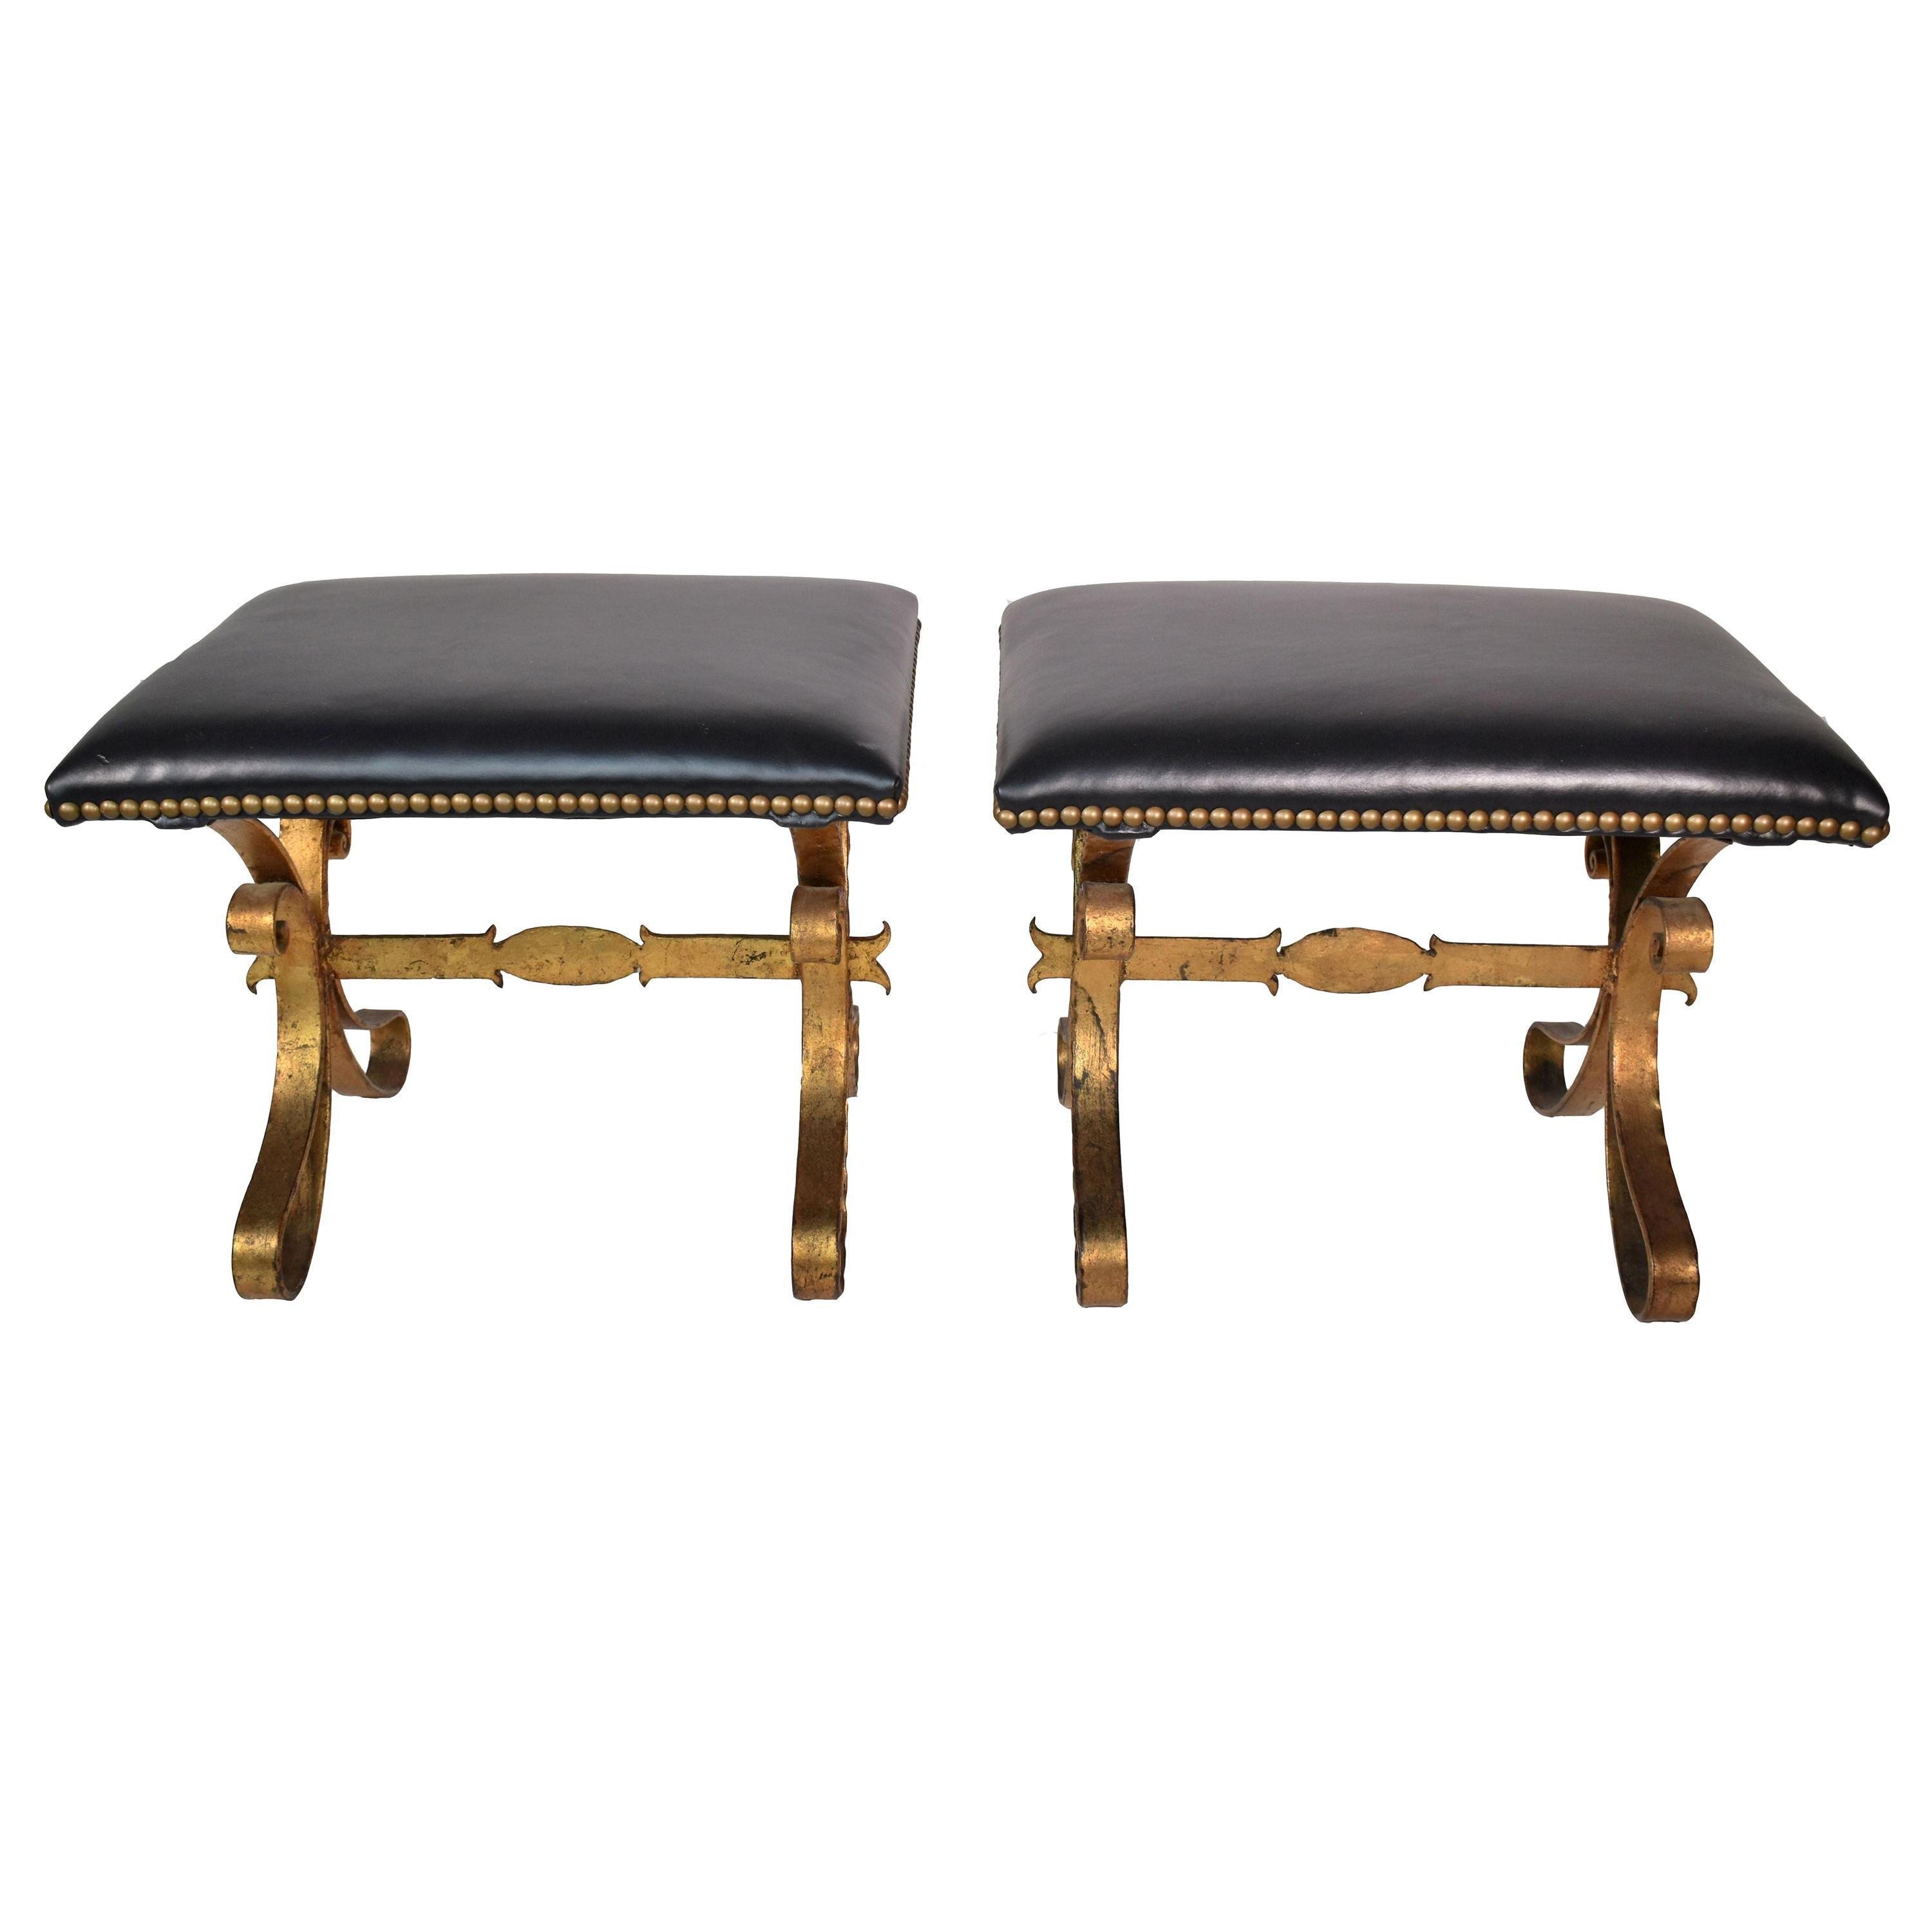 Pair of Vintage Gilded Iron Upholstered Stools